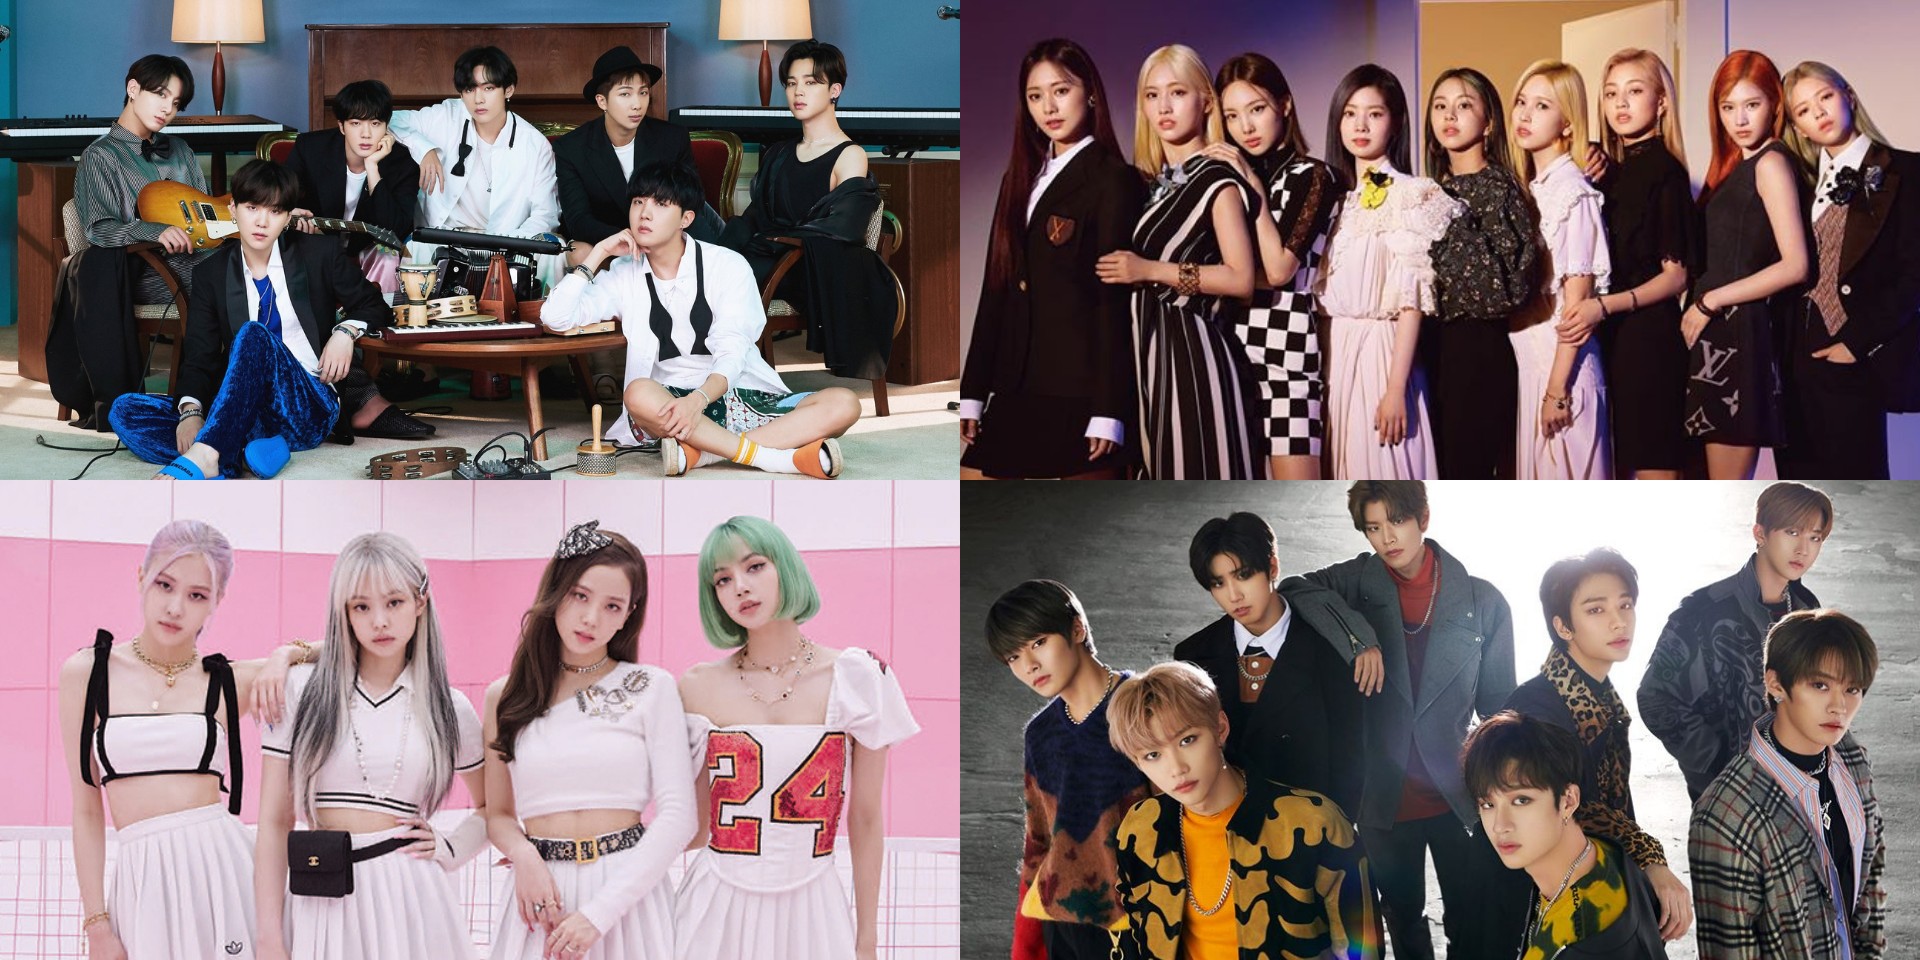 Spotify Wrapped unveils the Top K-pop artists of 2020 - BTS, BLACKPINK, TWICE, Stray Kids, and more